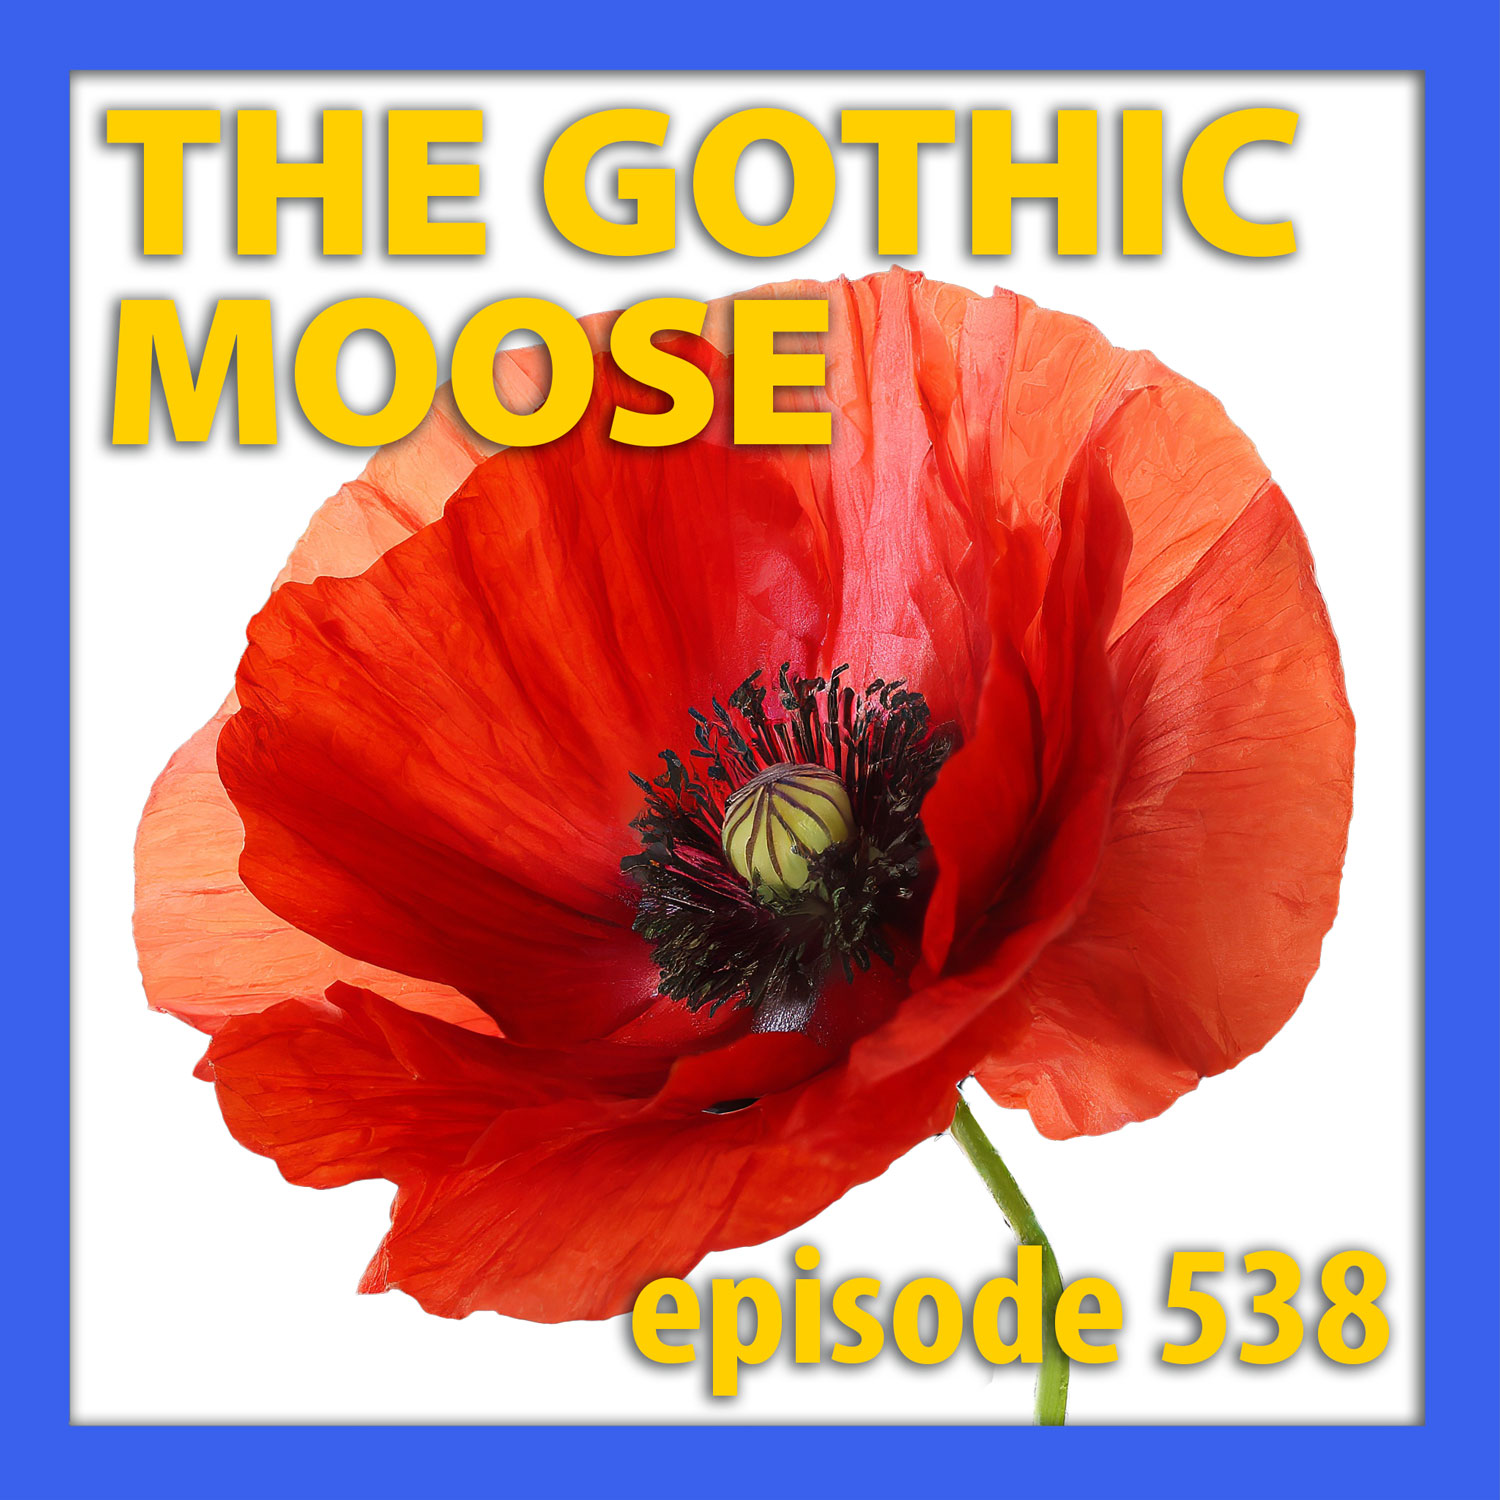 The Gothic Moose – Episode 538 – Mostly bands supporting Ukraine